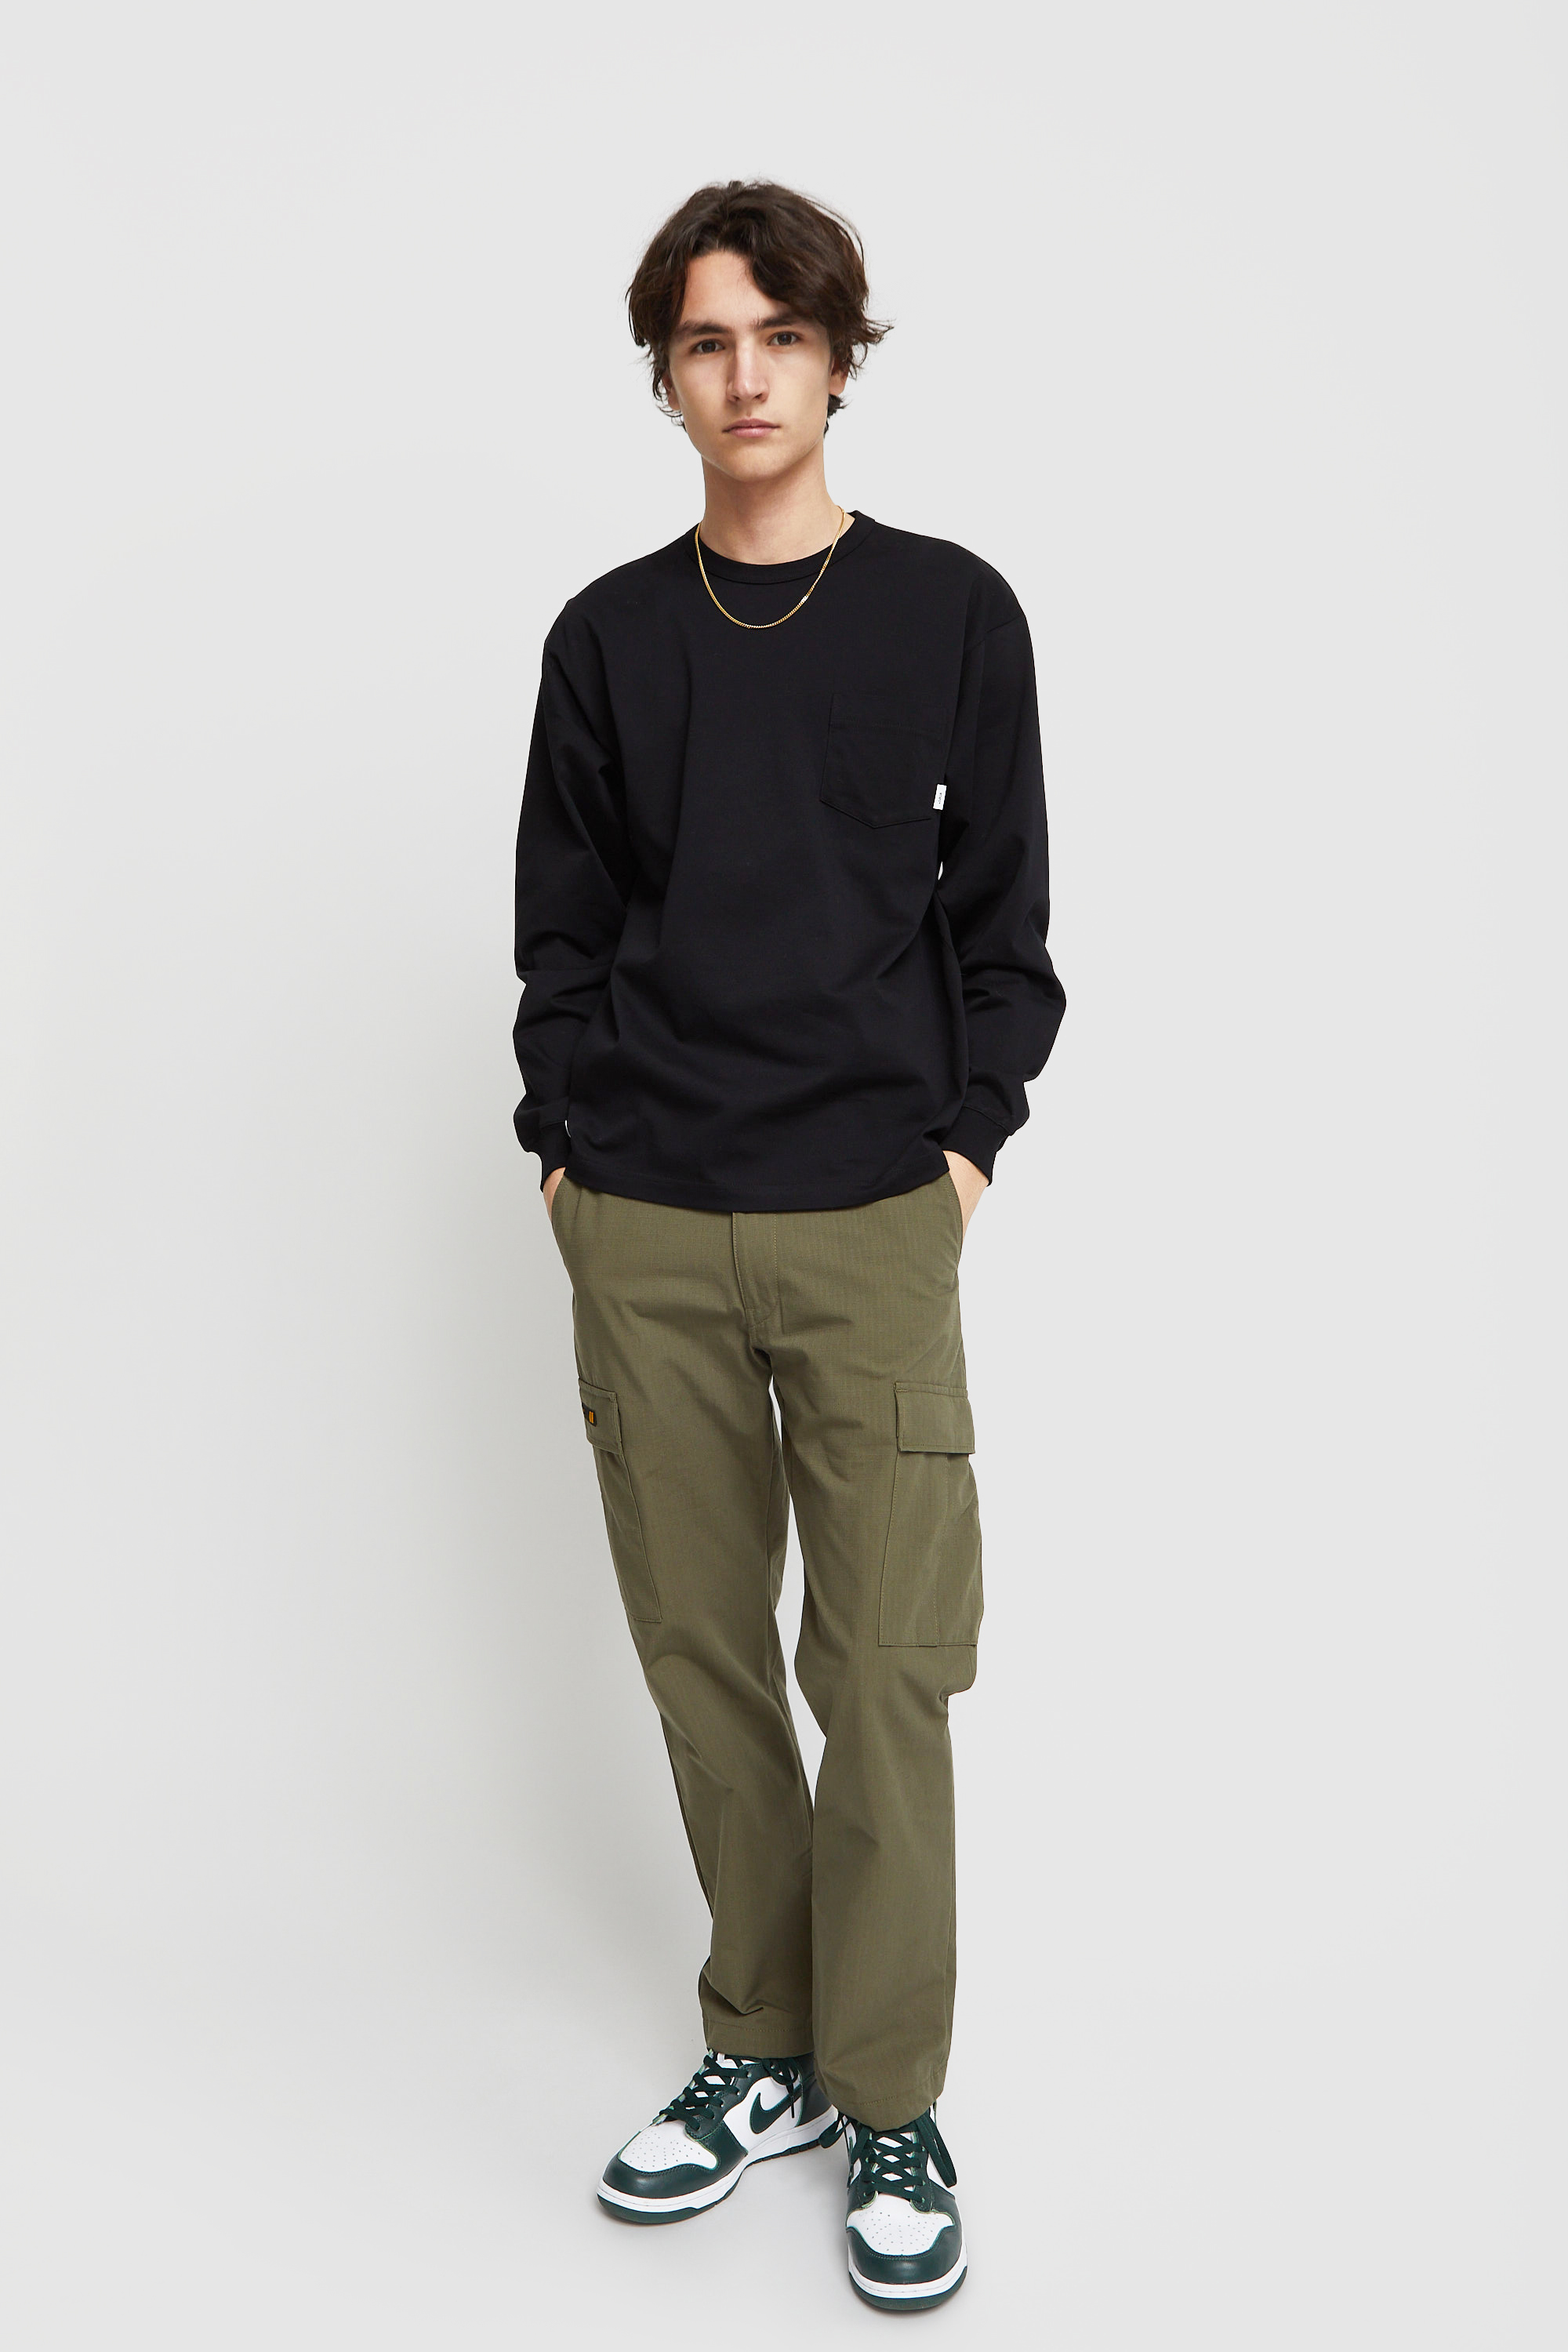 WTAPS Jungle Stock Trousers. Nyco. Olive drab